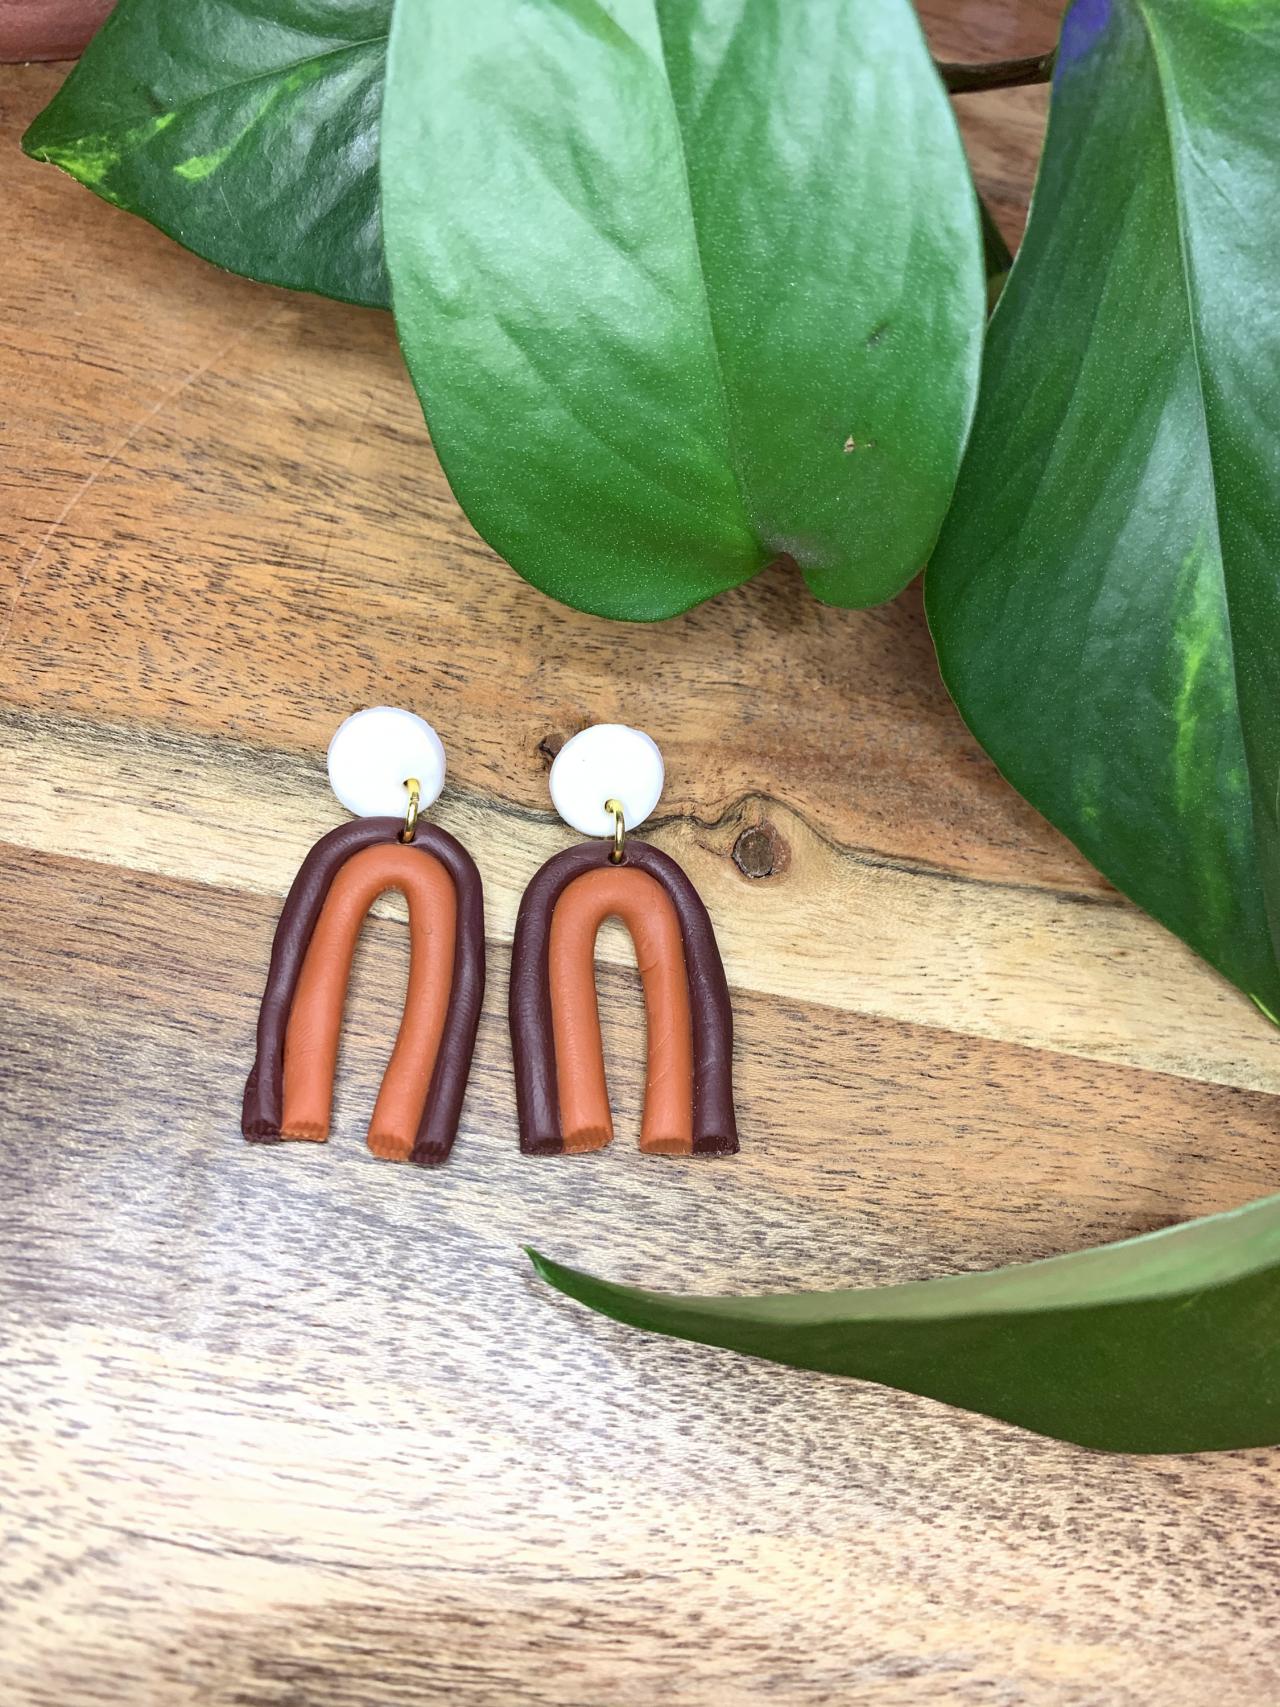 The Amelie Earrings. Cute Statement Polymer Clay Arch Earrings